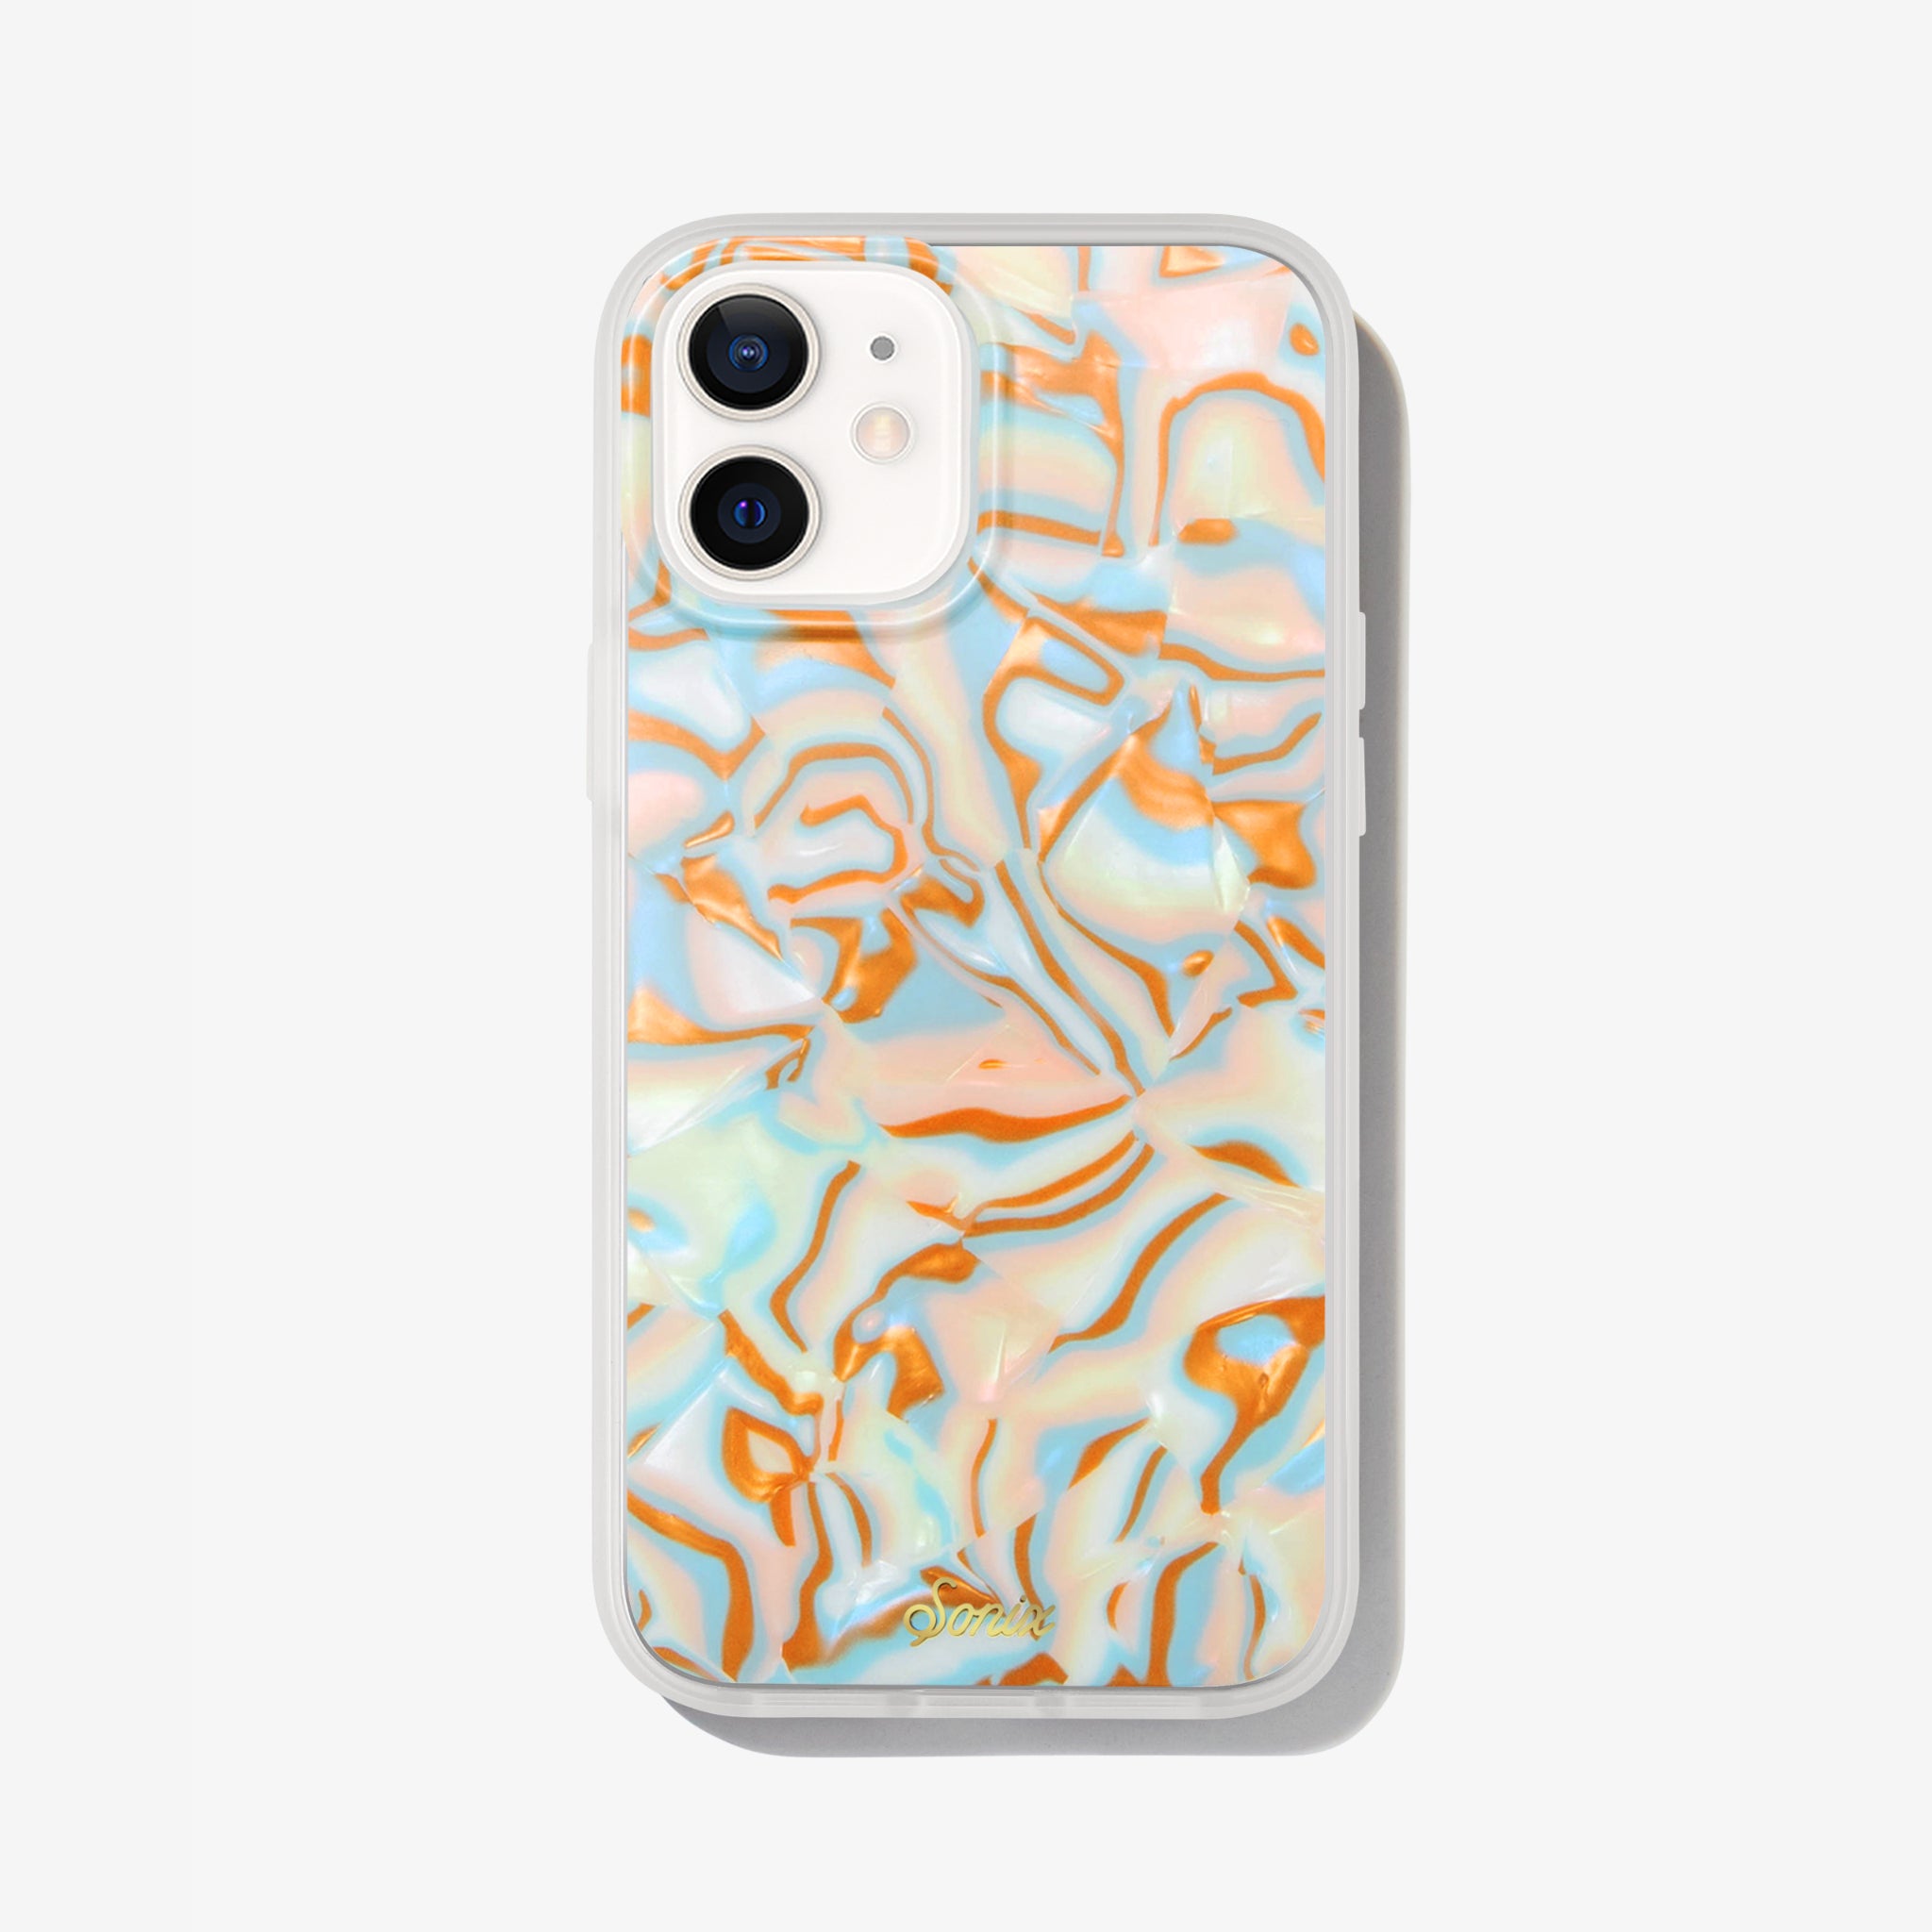 metallic oranges, blues, and cream colors in a wavy 70's pattern shown on an iphone 12 